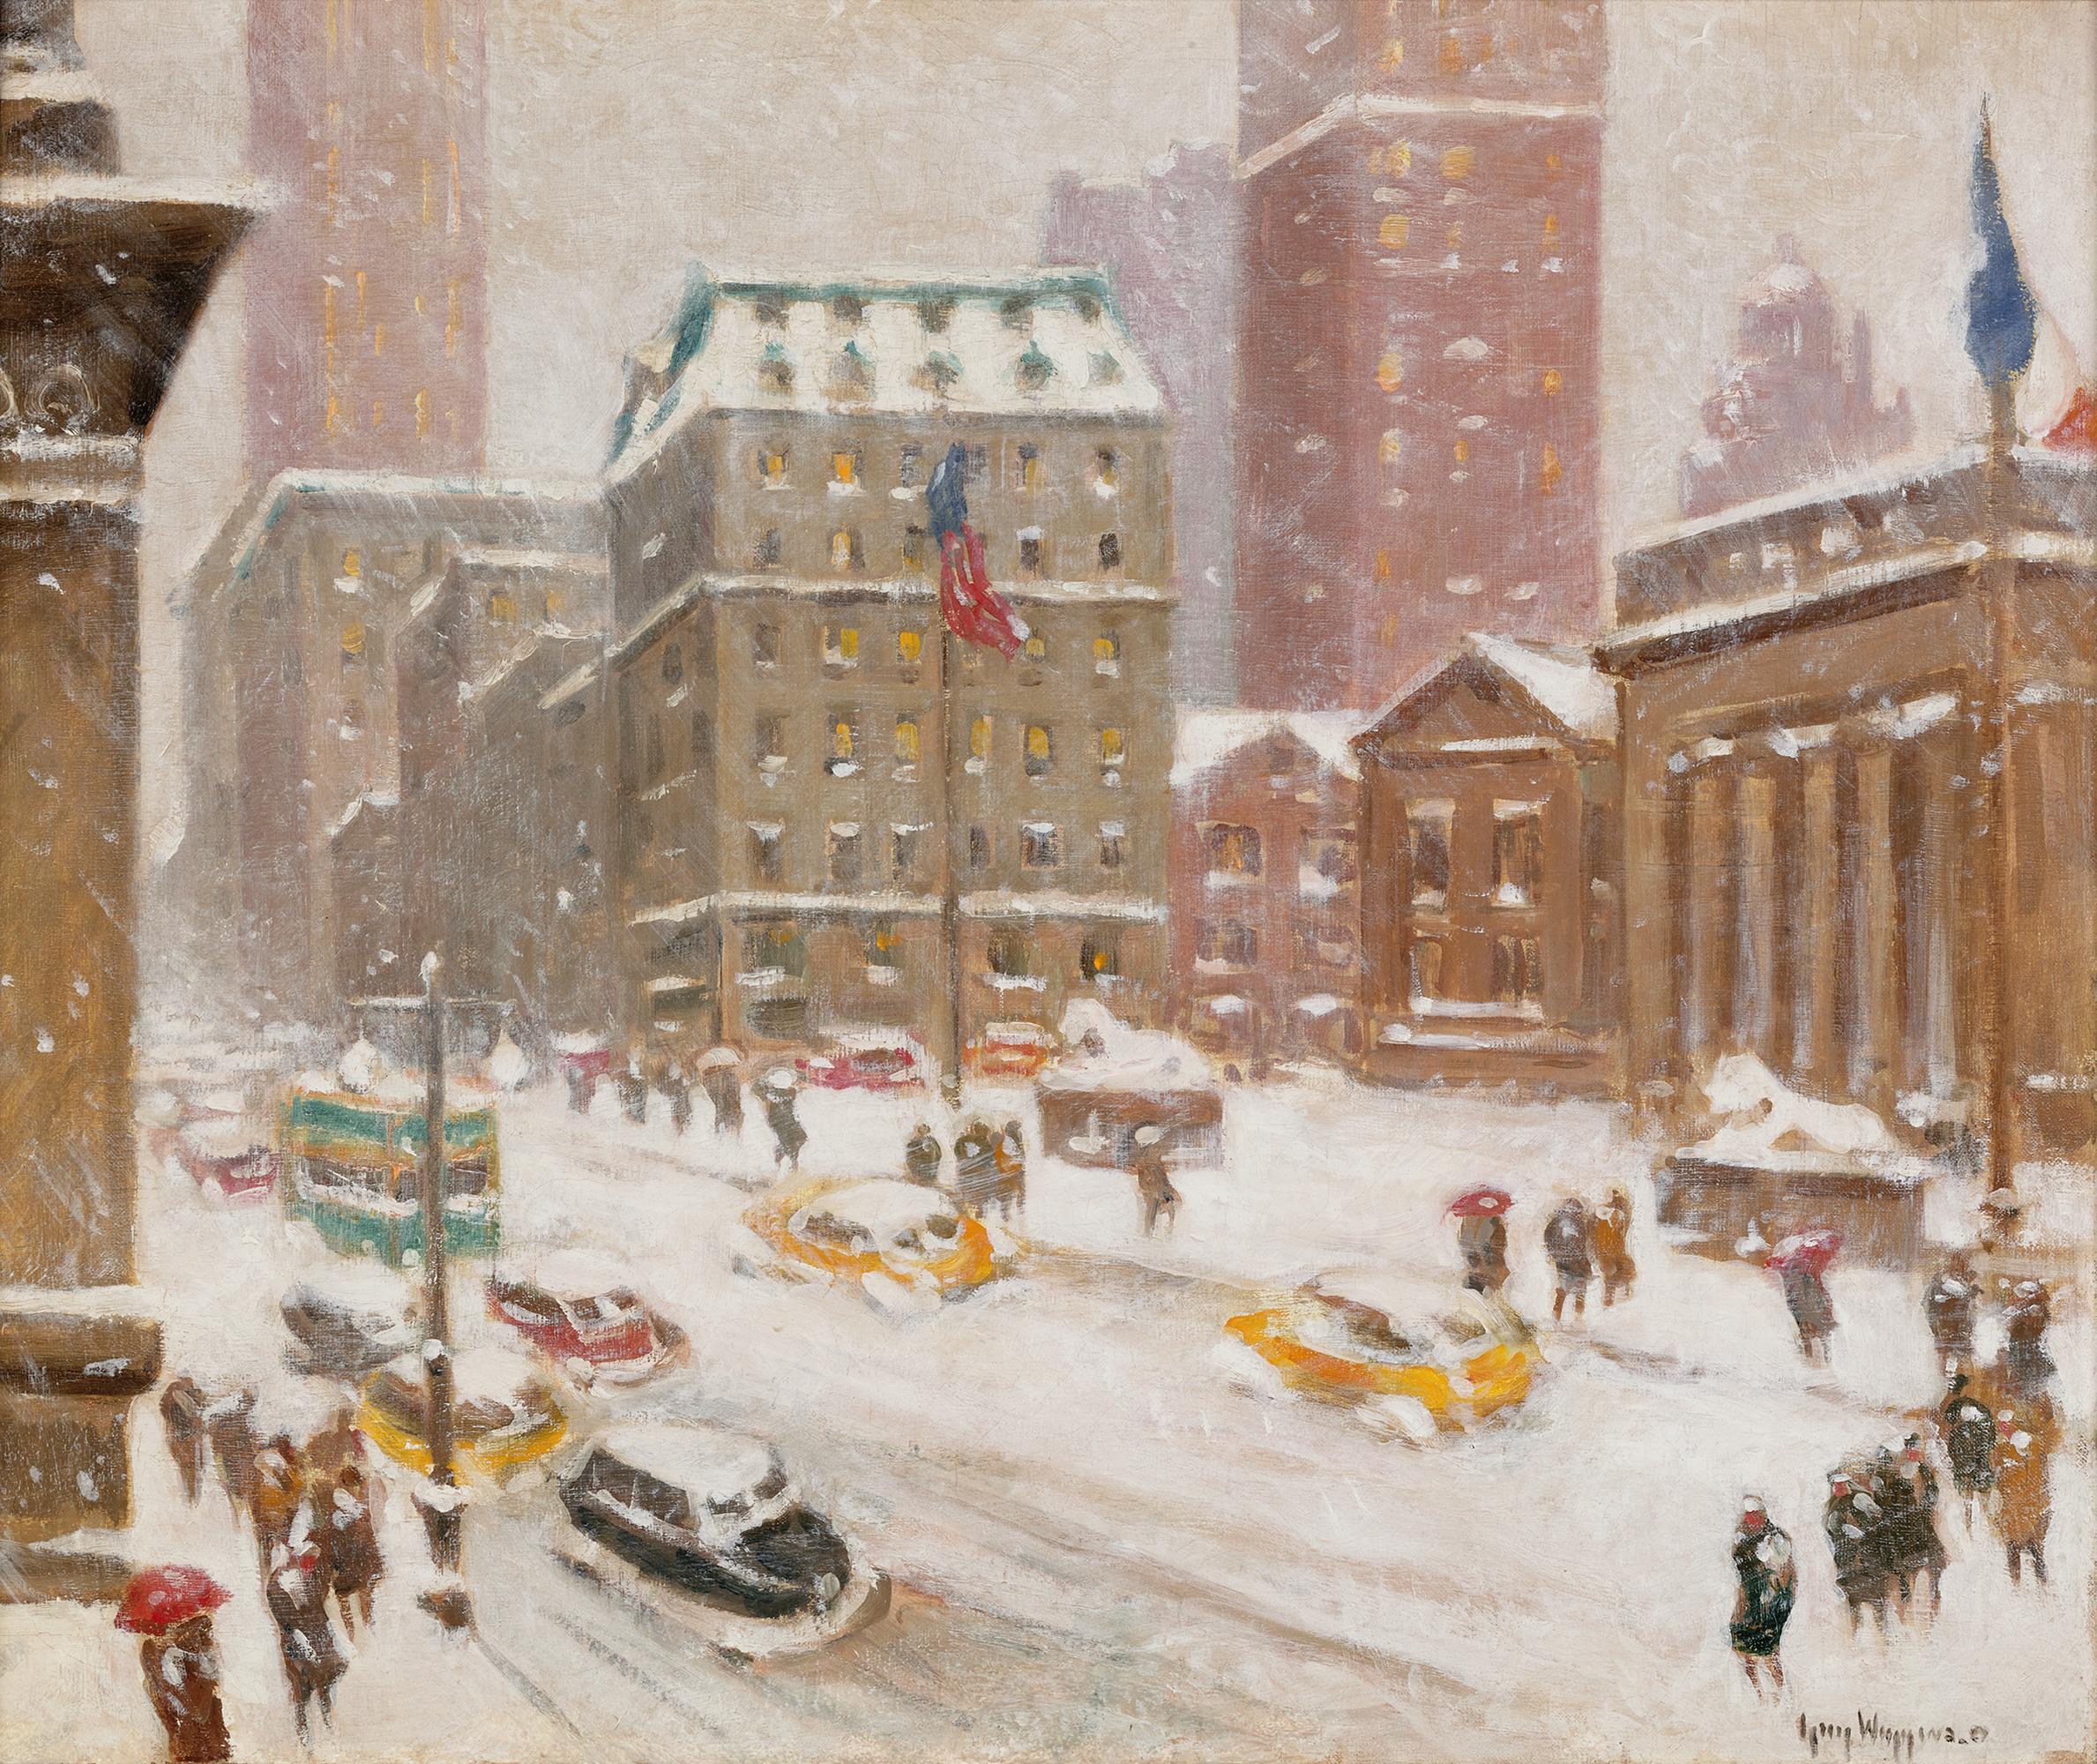 Guy C. Wiggins
1883-1962 | American

5th Avenue Storm at 42nd Street

Signed "Guy Wiggins" (lower right)
Oil on canvas

No other painter so poetically captured the beauty of winter in New York City as Guy Wiggins. Regarded as the last great American